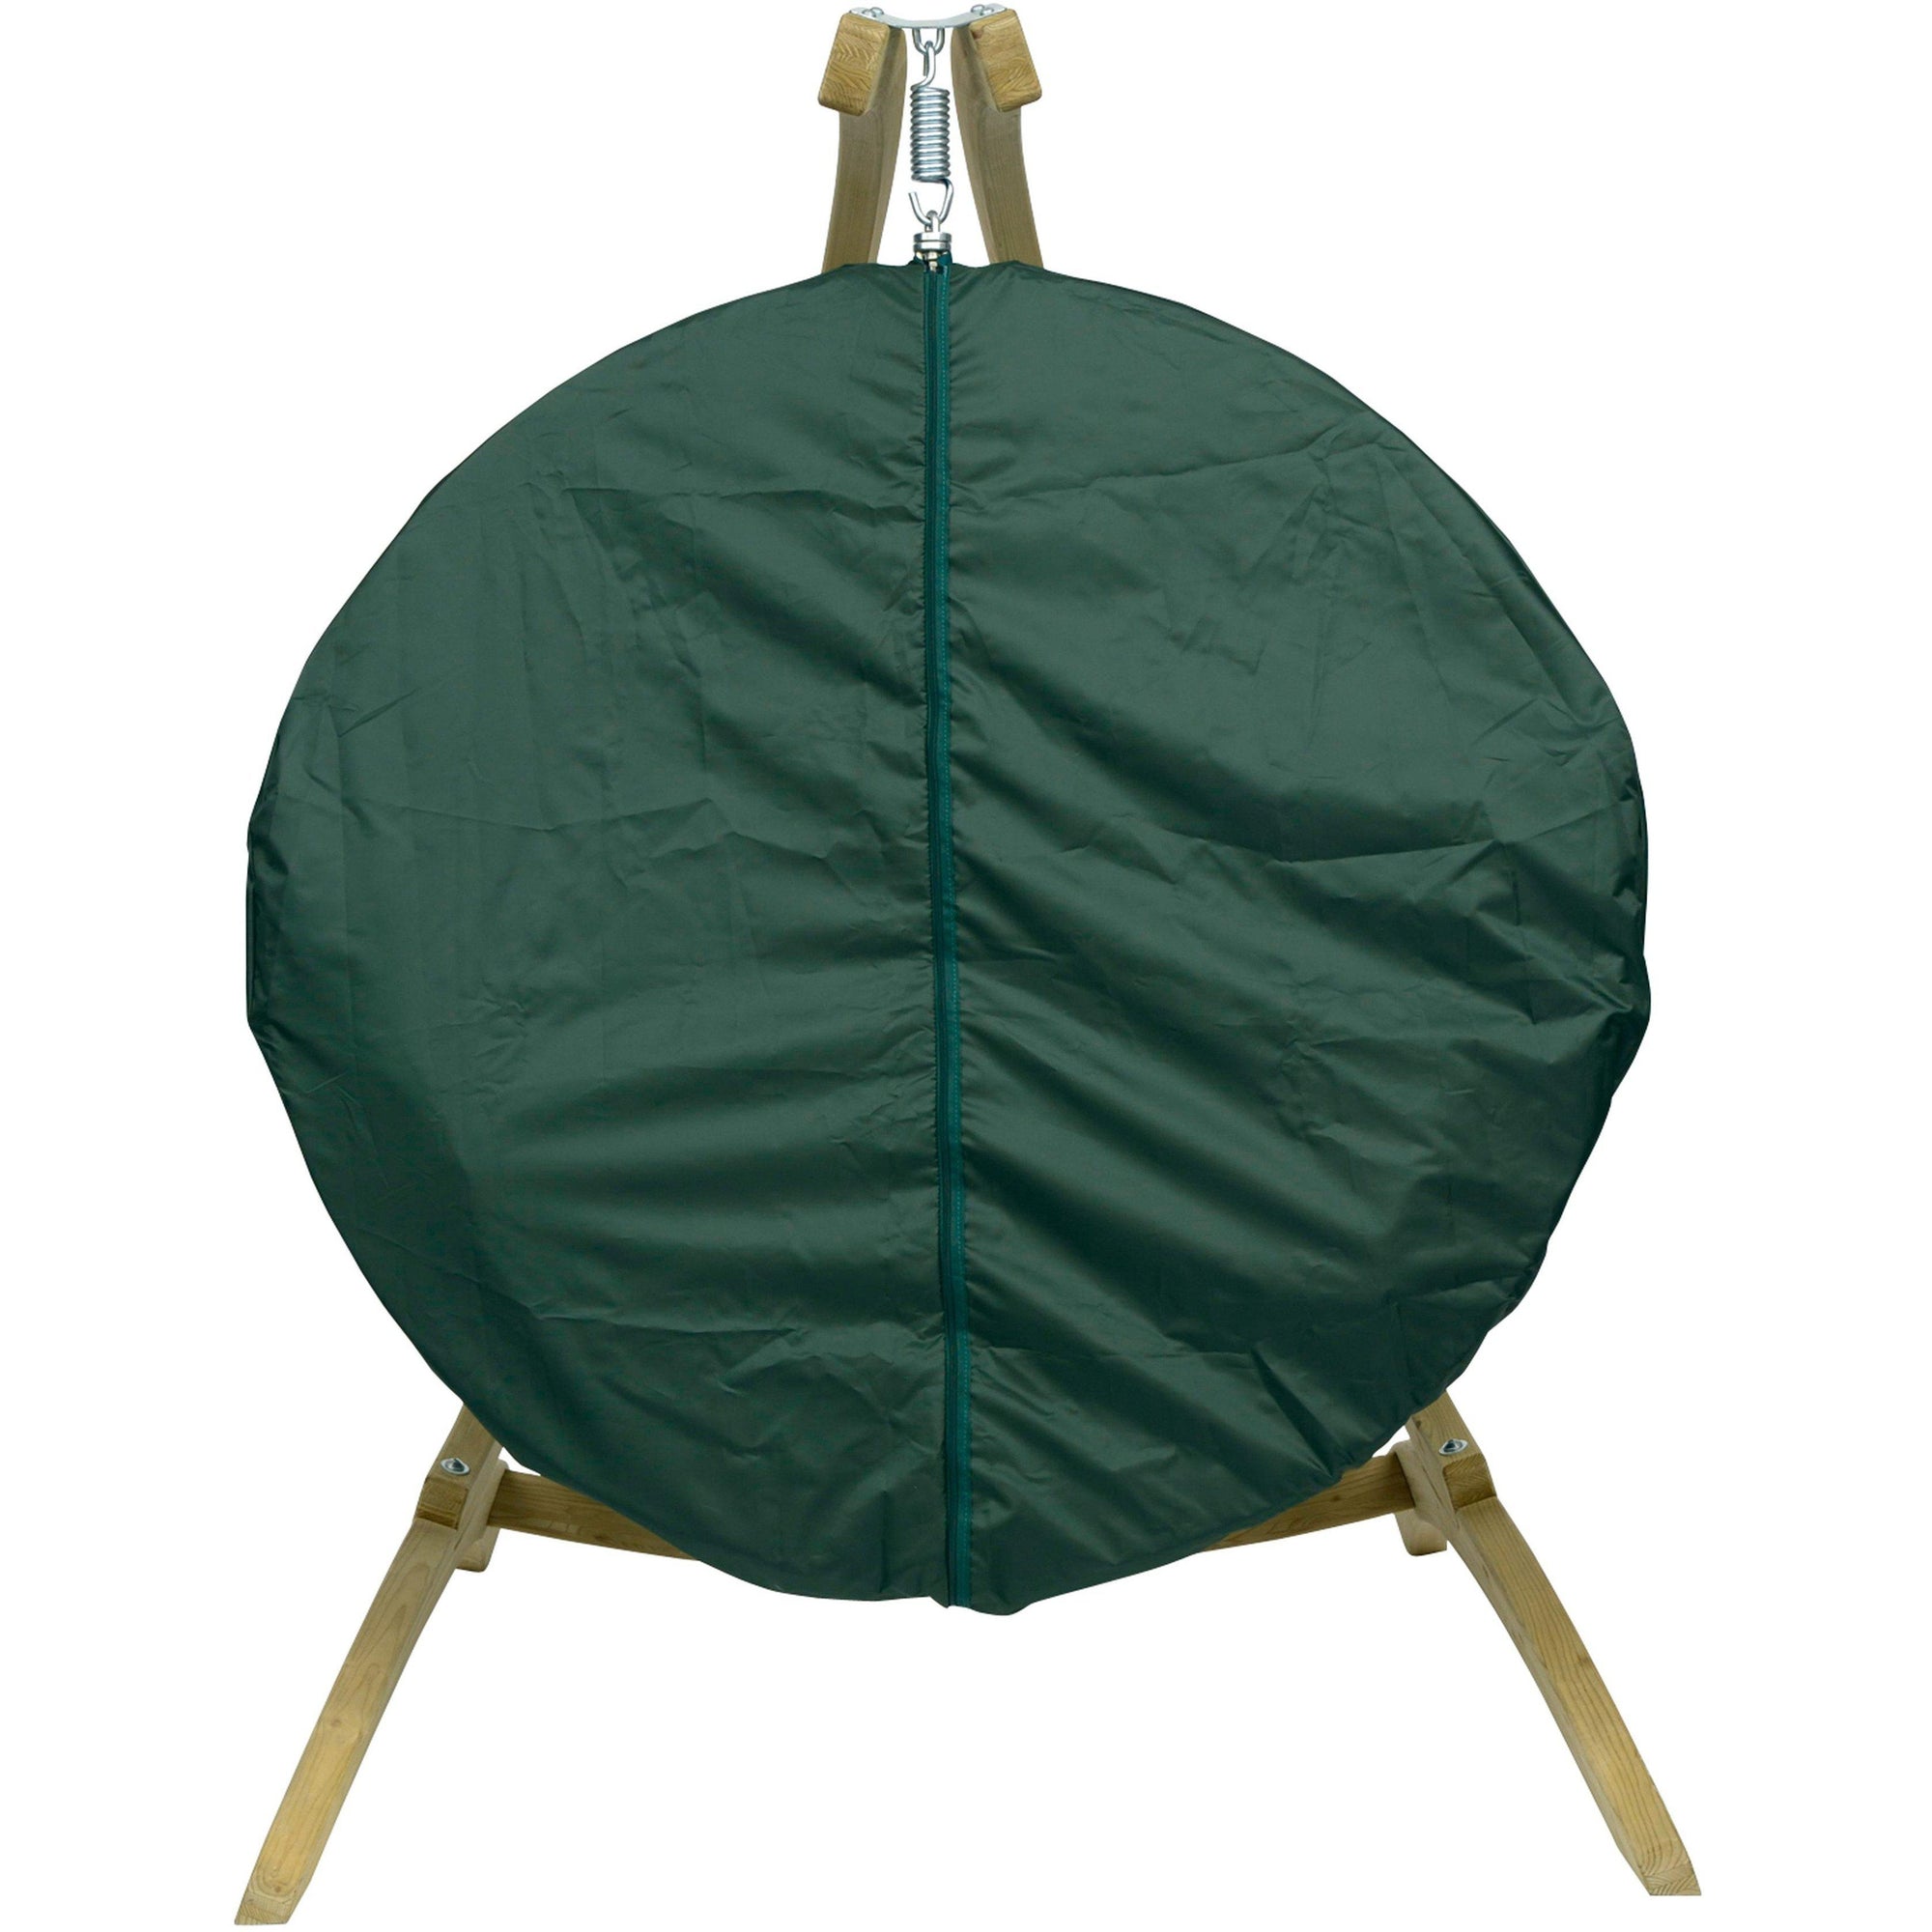 Globo Chair Outdoor Weather Cover, from Byer of Maine